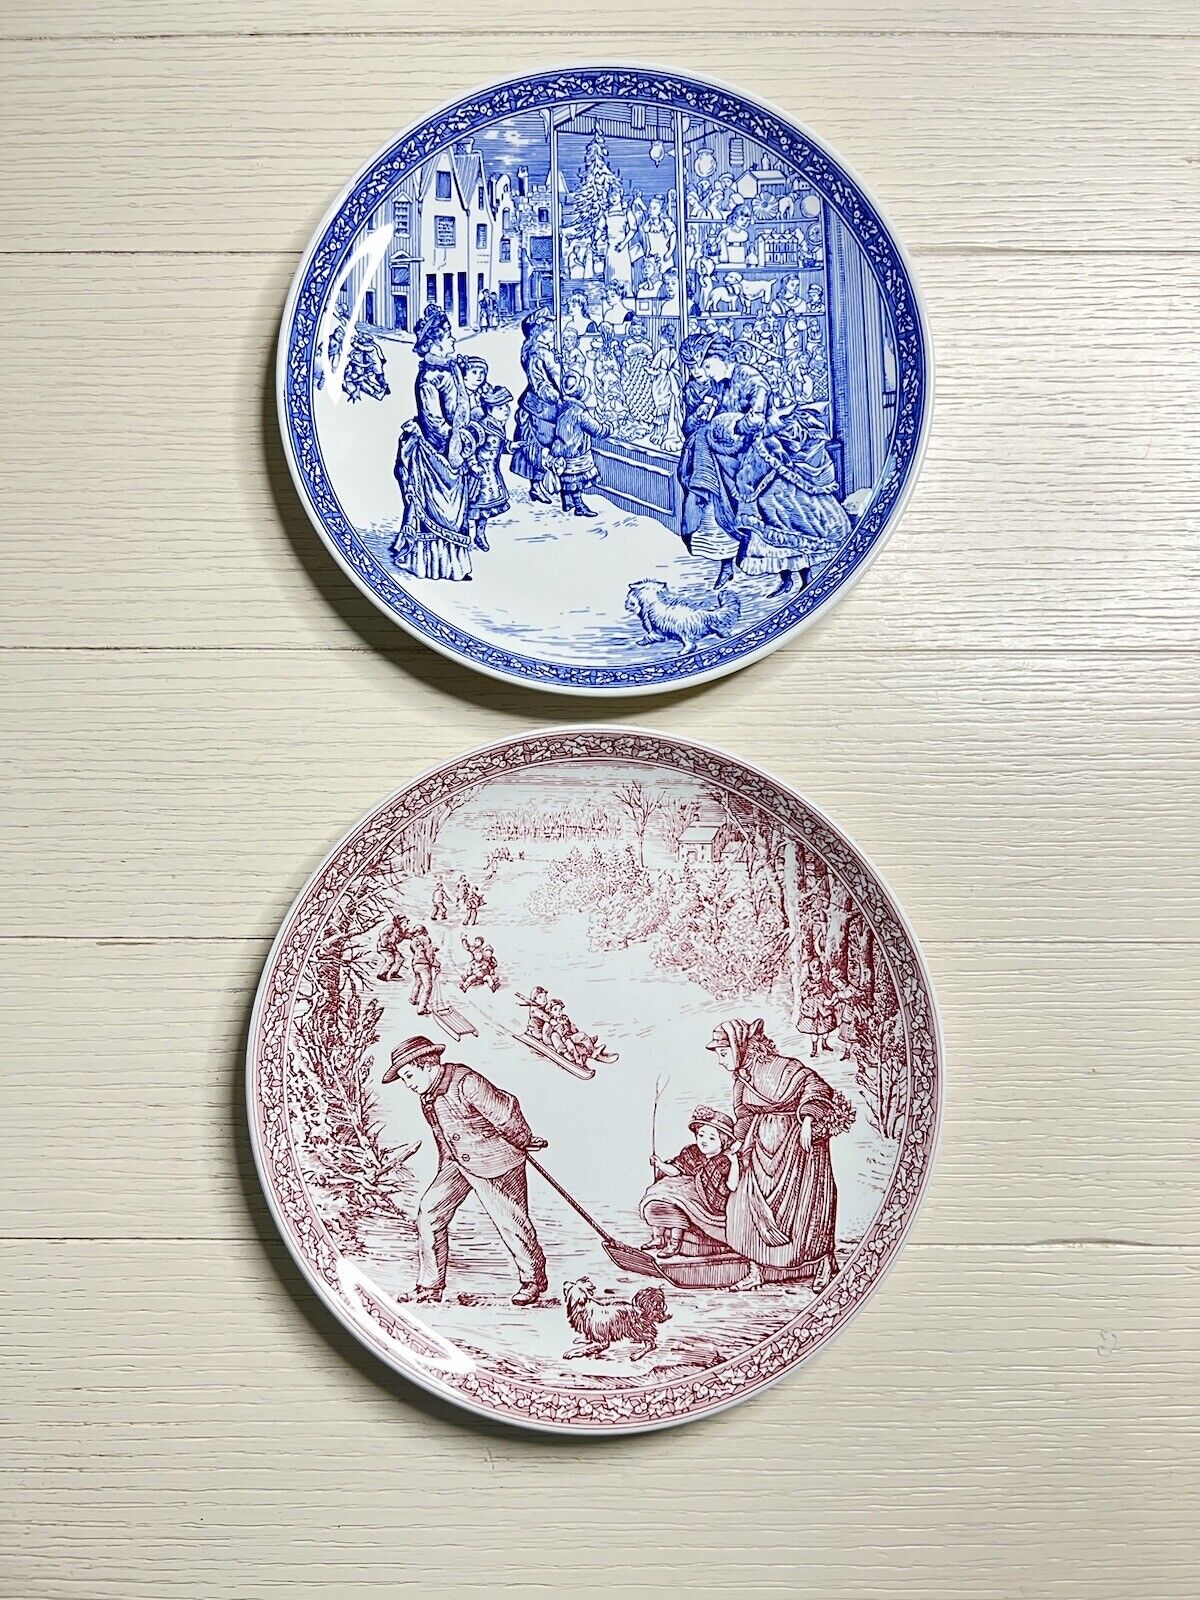 Vintage Spode The Blue Room Collection Christmas Plates # 3 And # 4  Set Of 2